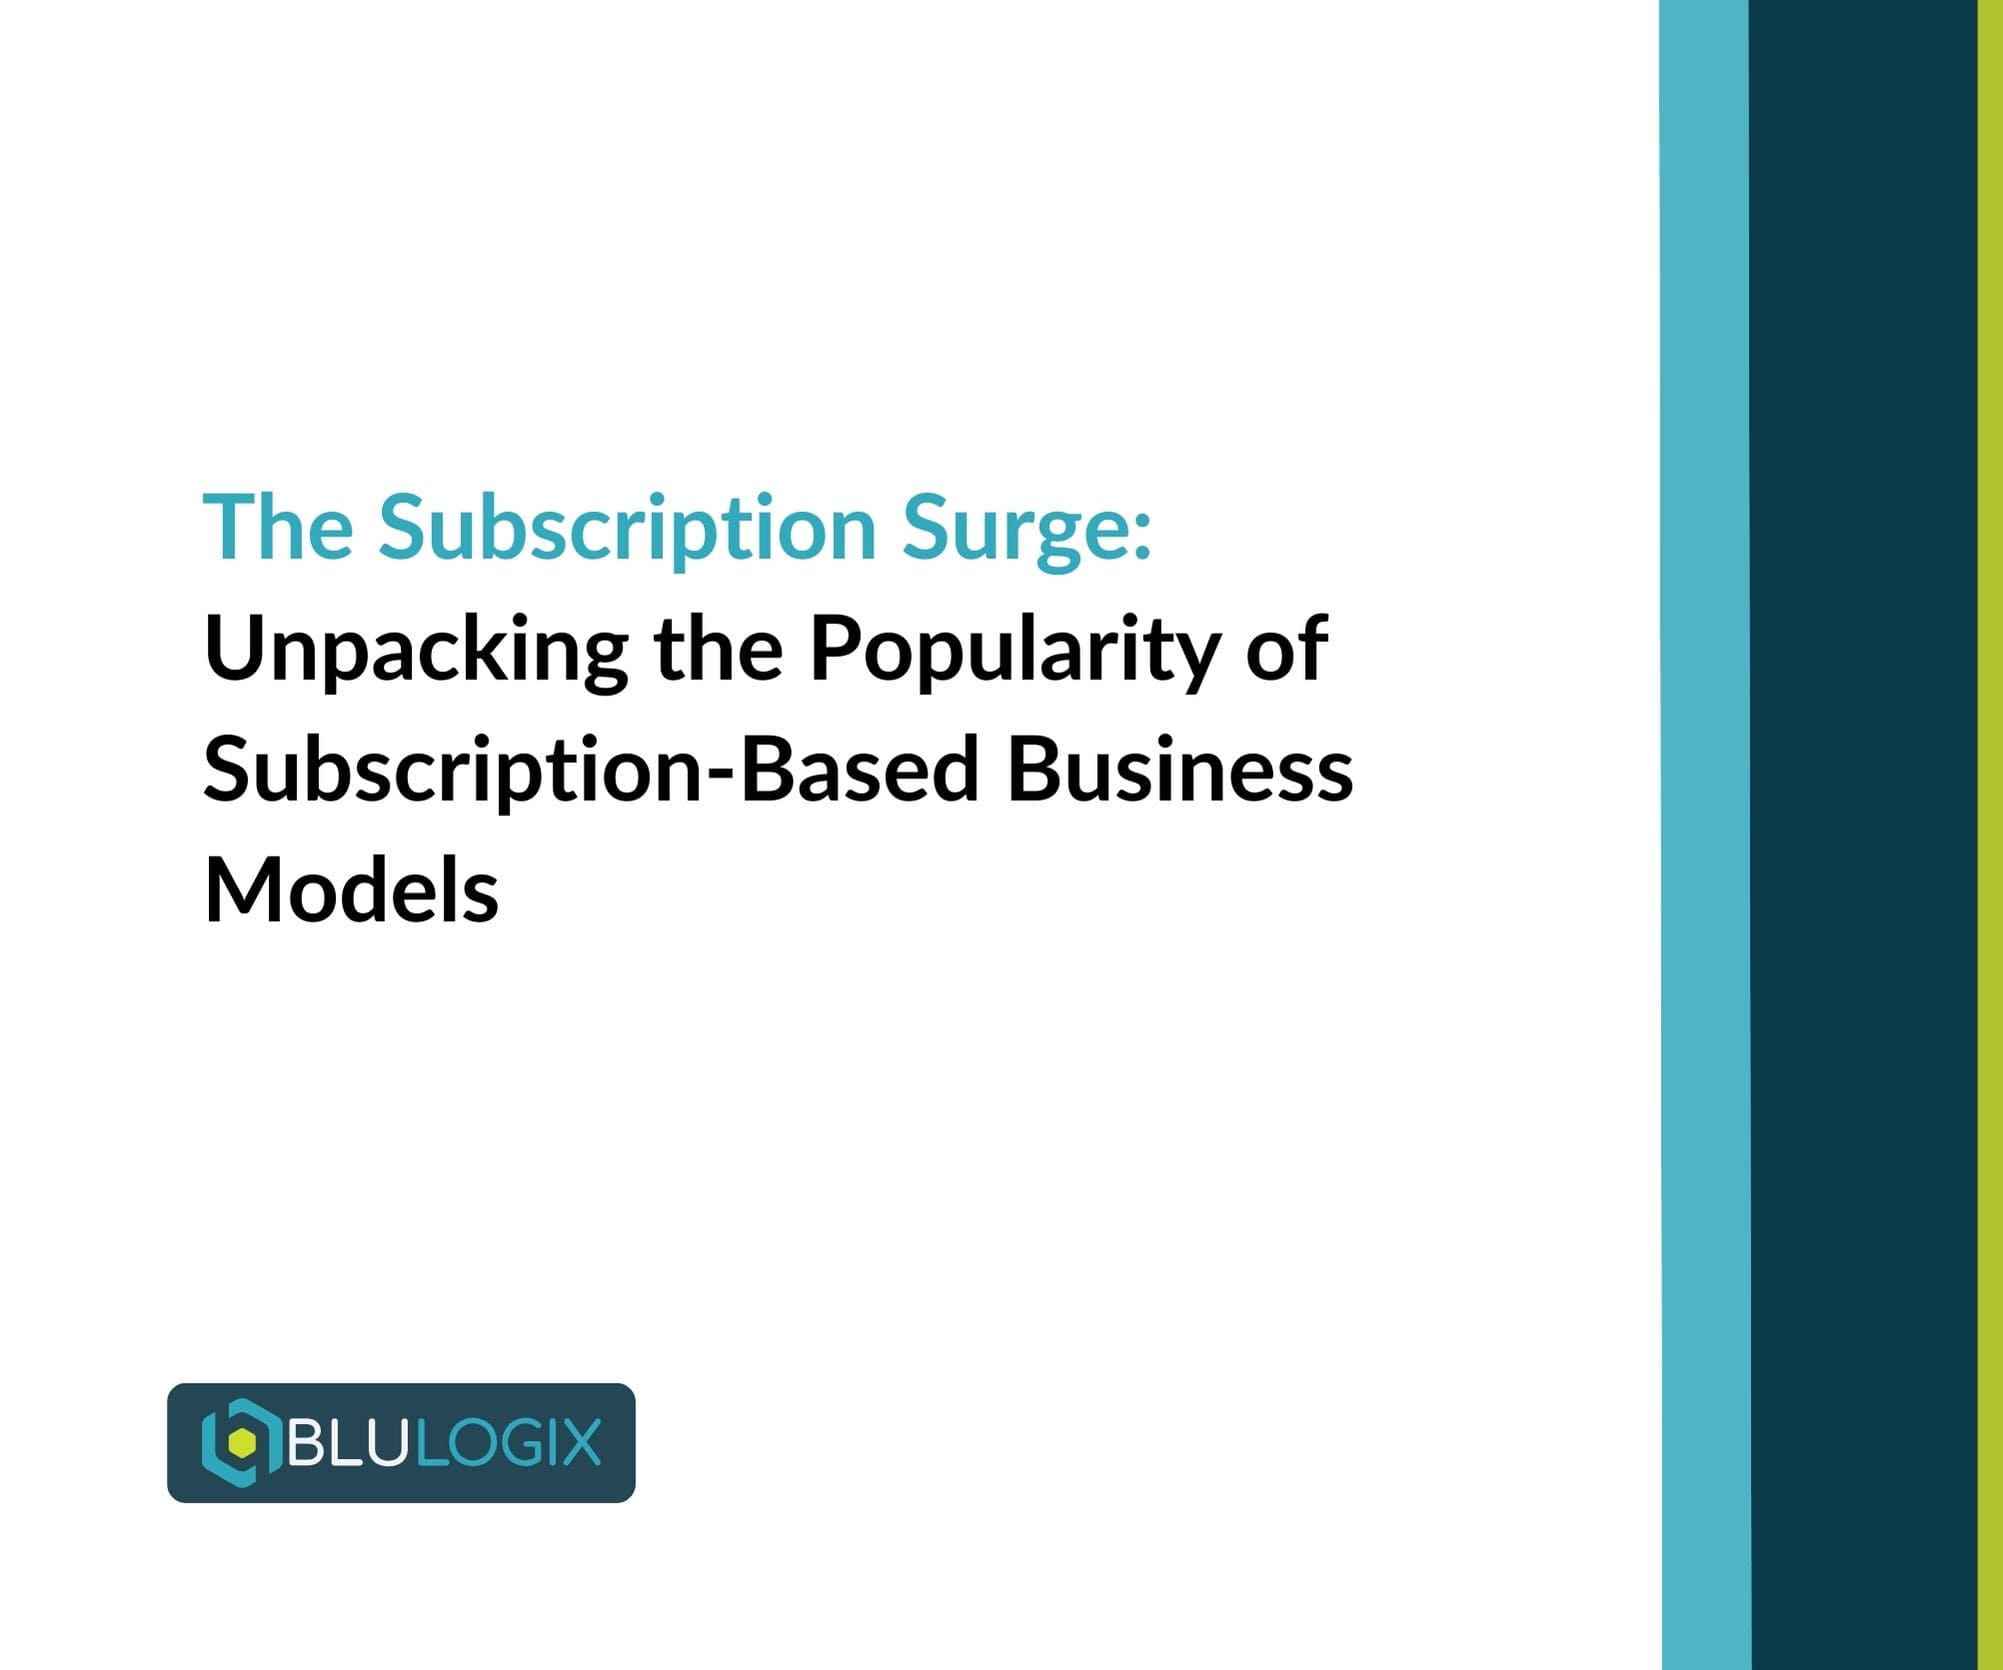 The Subscription Surge Unpacking the Popularity of Subscription Based Business Models